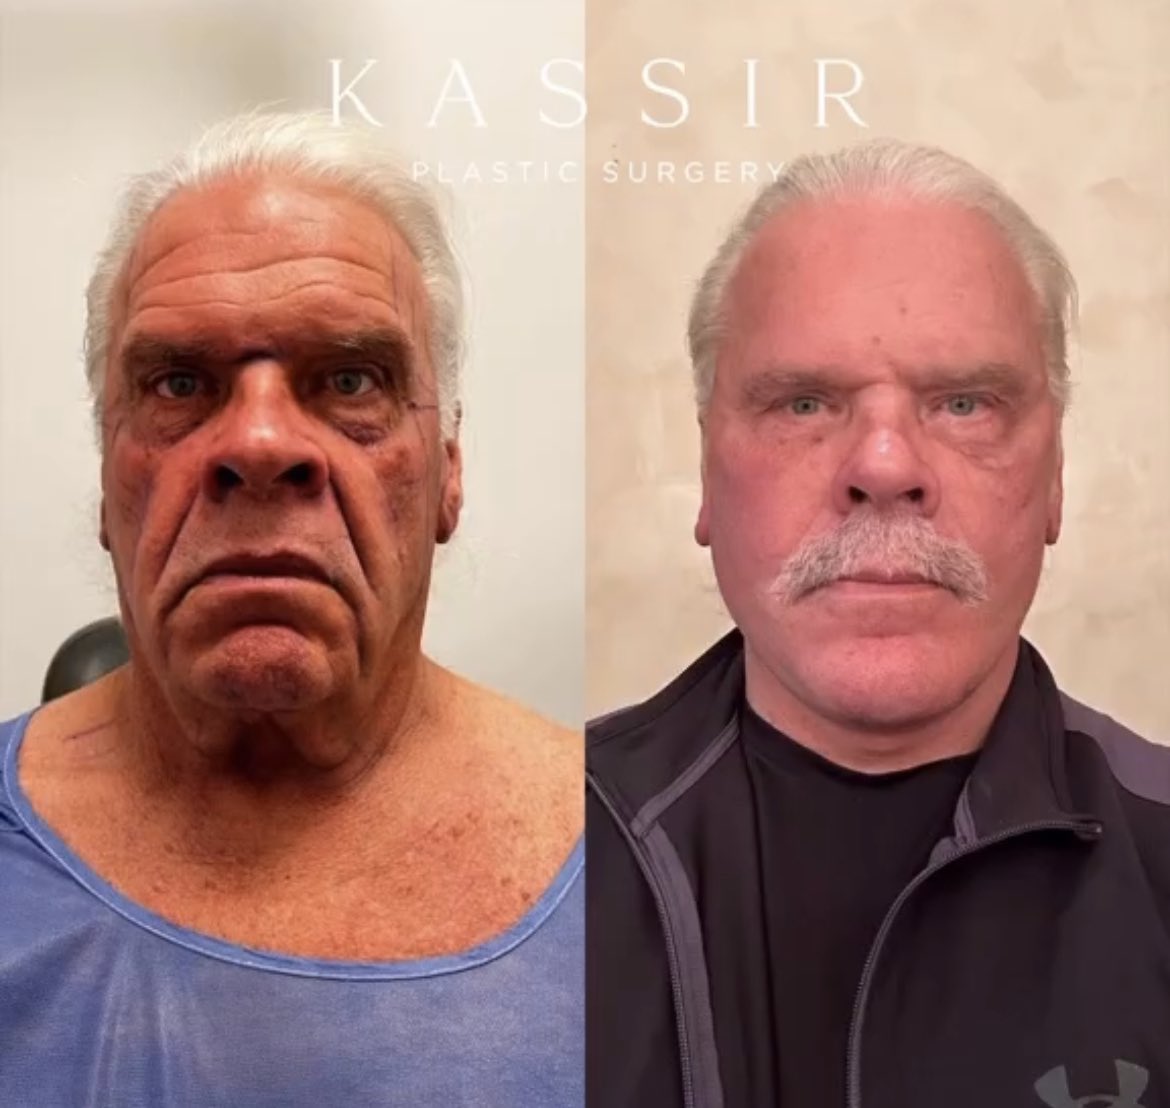 Full Face Rejuvenation ✨

This amazing 70 year old patient is ONLY 2 weeks post op

He had a:
Deep Plane Face & Neck Lift
Endoscopic Forehead & Brow Lift
Revision Upper & Lower Blepharoplasty Fat Transfer to Face
Fractional CO2 Laser
Septo-Rhinoplasty
Chin Implant